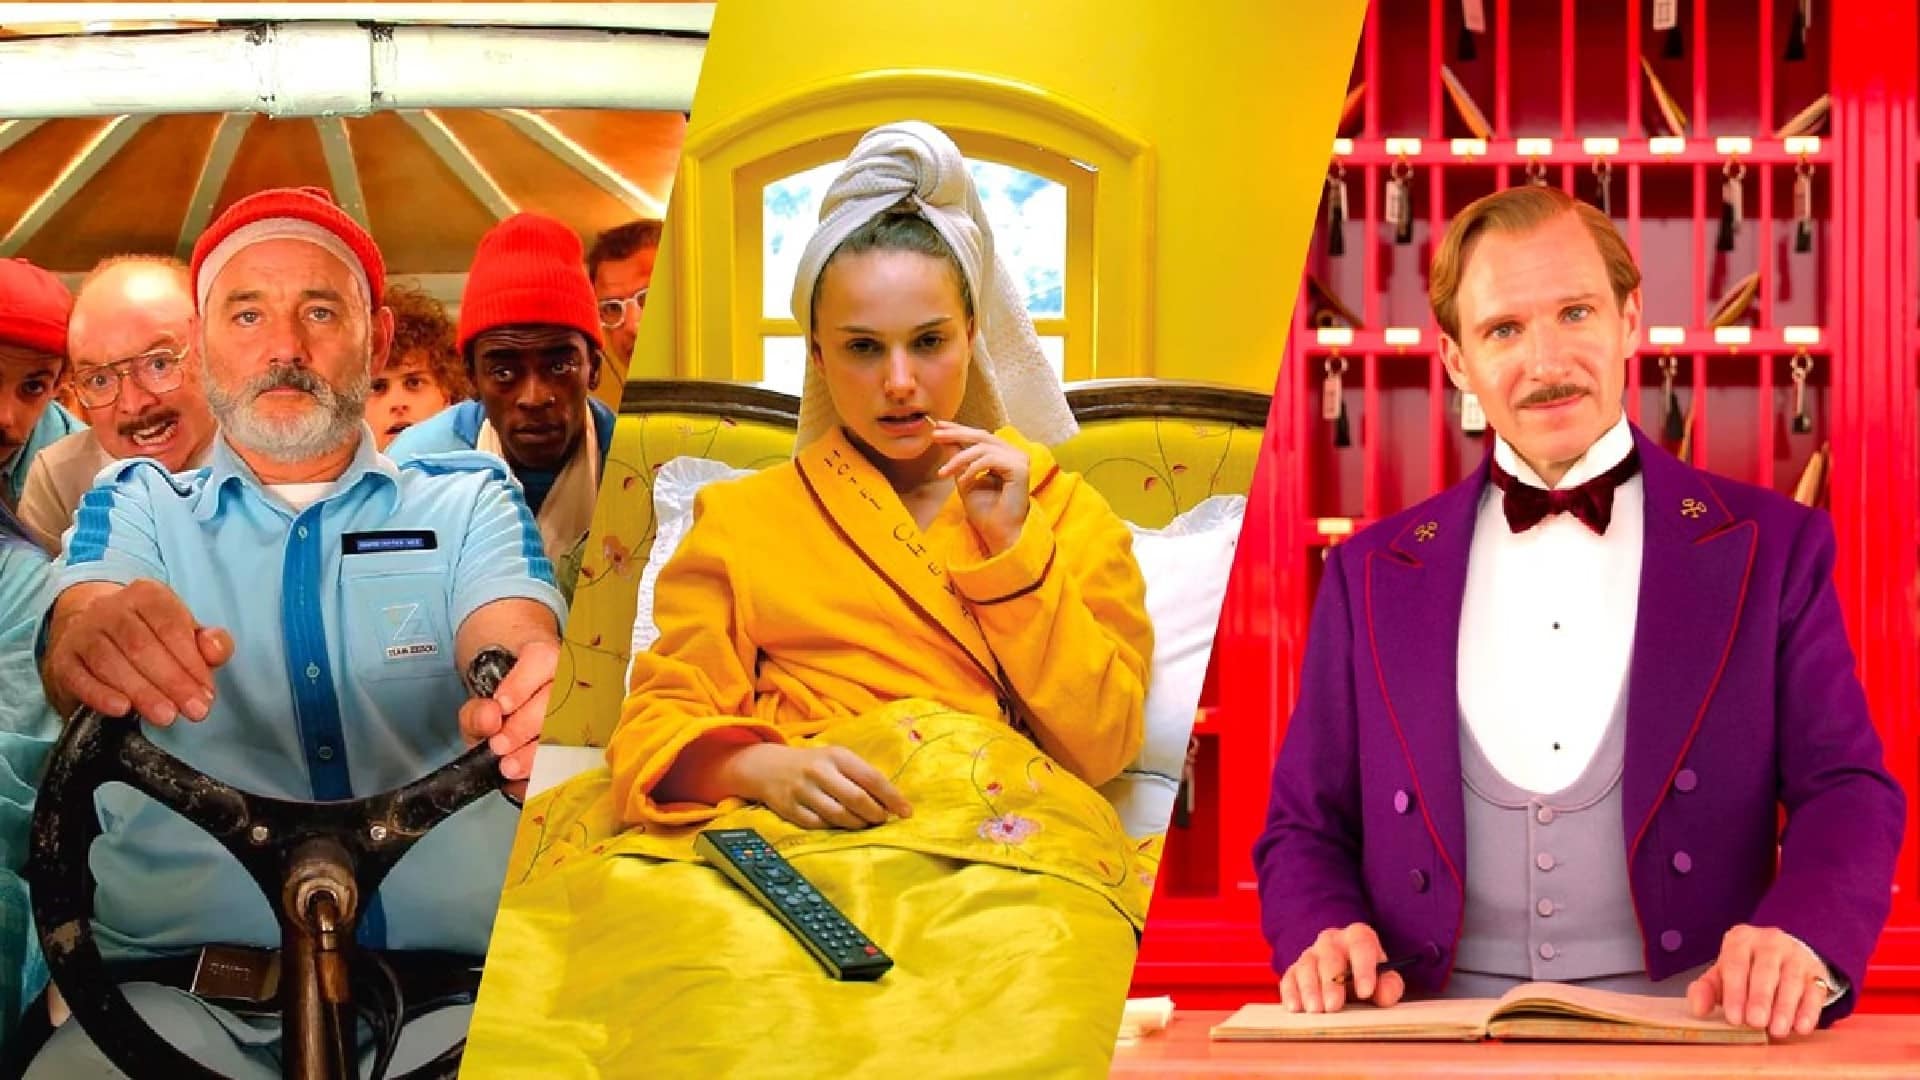 wes anderson film